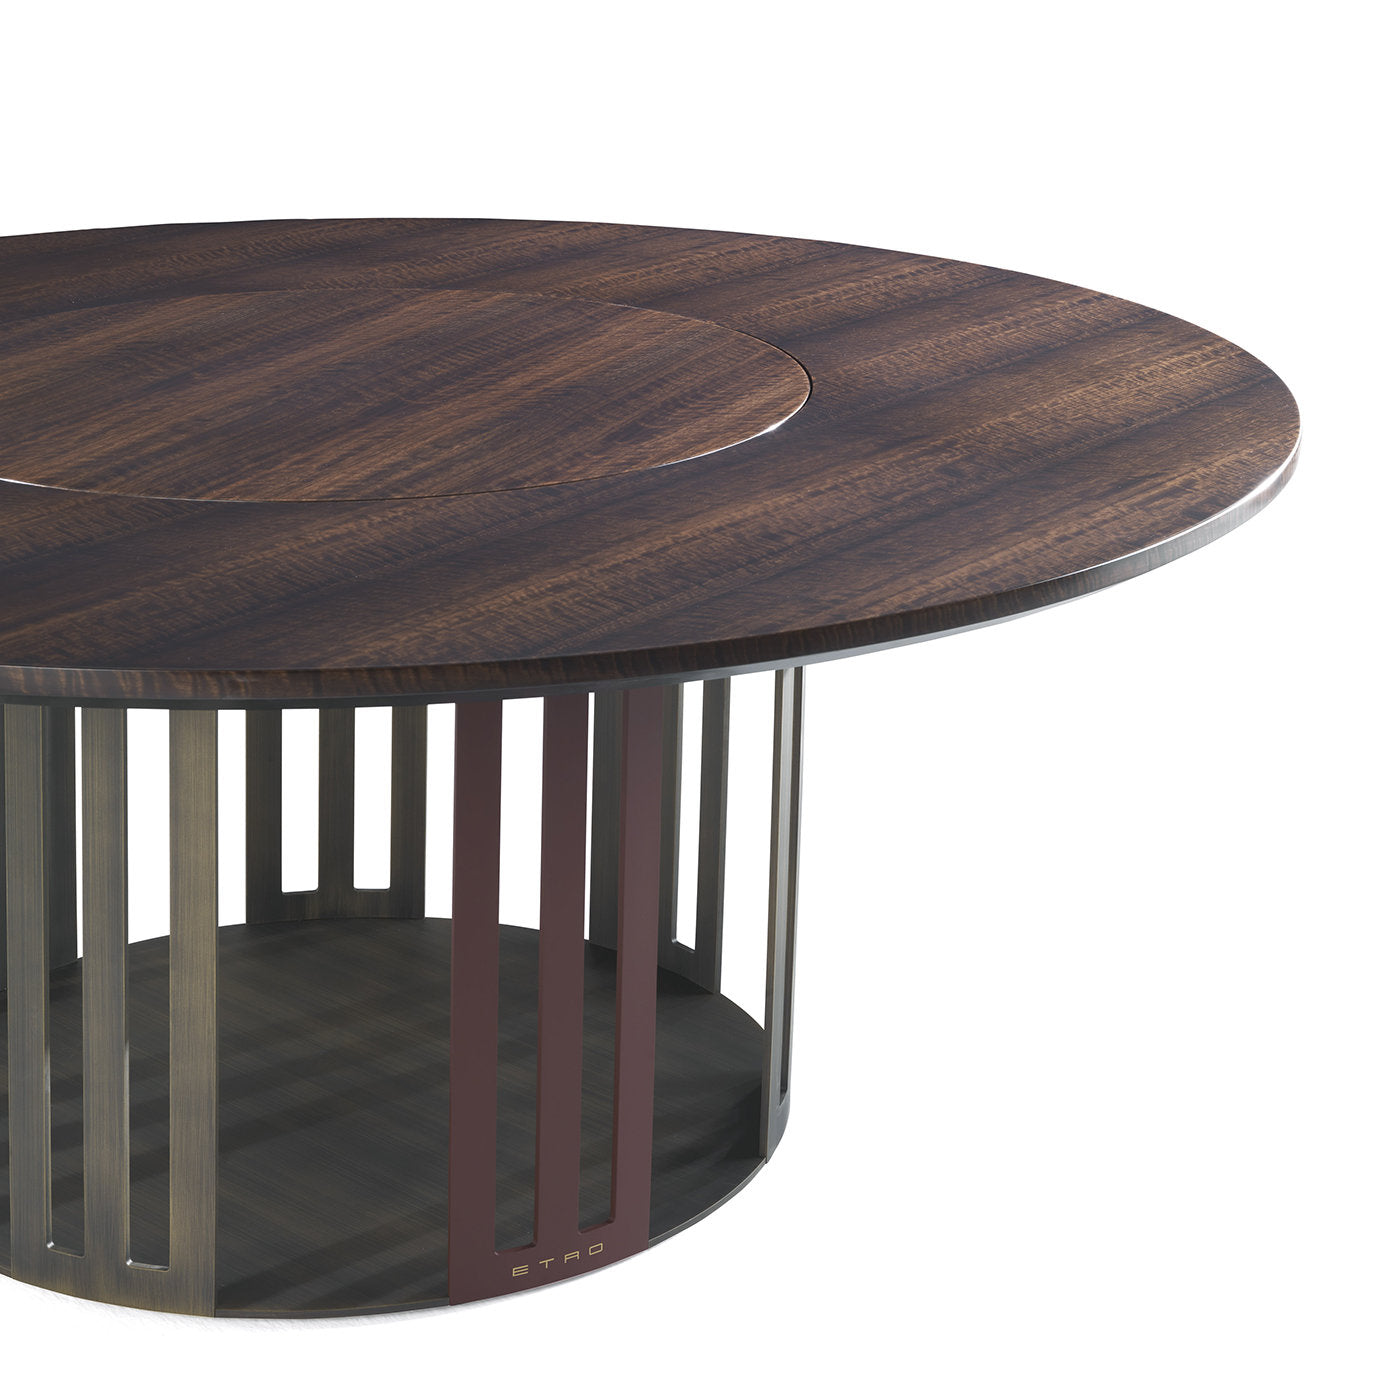 Klee Round Dining Table with Lazy Susan - Alternative view 2